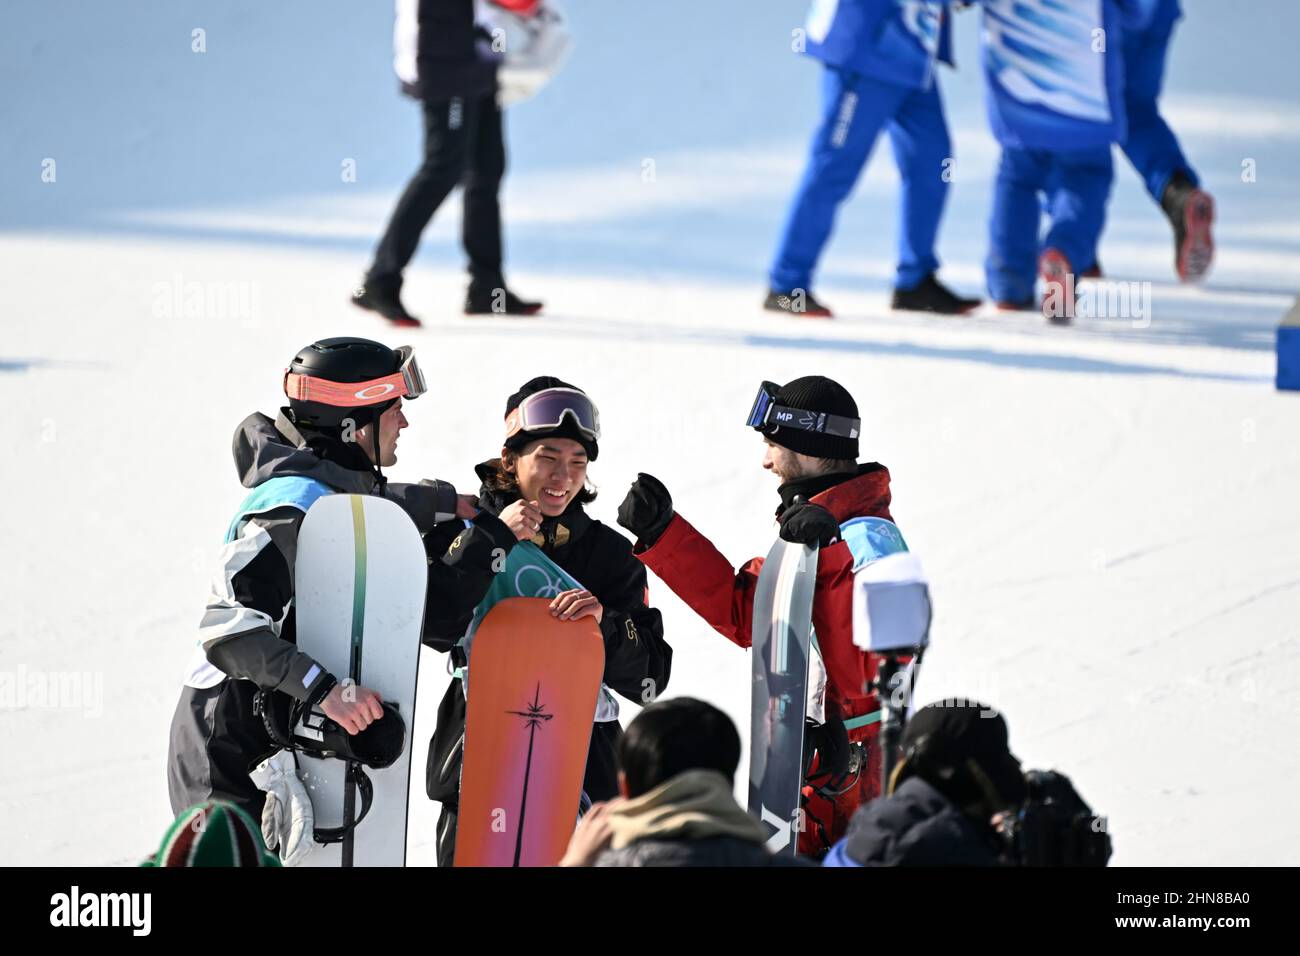 Beijing, China. 15th Feb, 2022. Mons Roisland (L) of Norway and Max Parrot (R) of Canada congratulate Su Yiming of China after the men's snowboard big air final of Beijing 2022 Winter Olympics at Big Air Shougang in Beijing, capital of China, Feb. 15, 2022. Credit: Li He/Xinhua/Alamy Live News Stock Photo